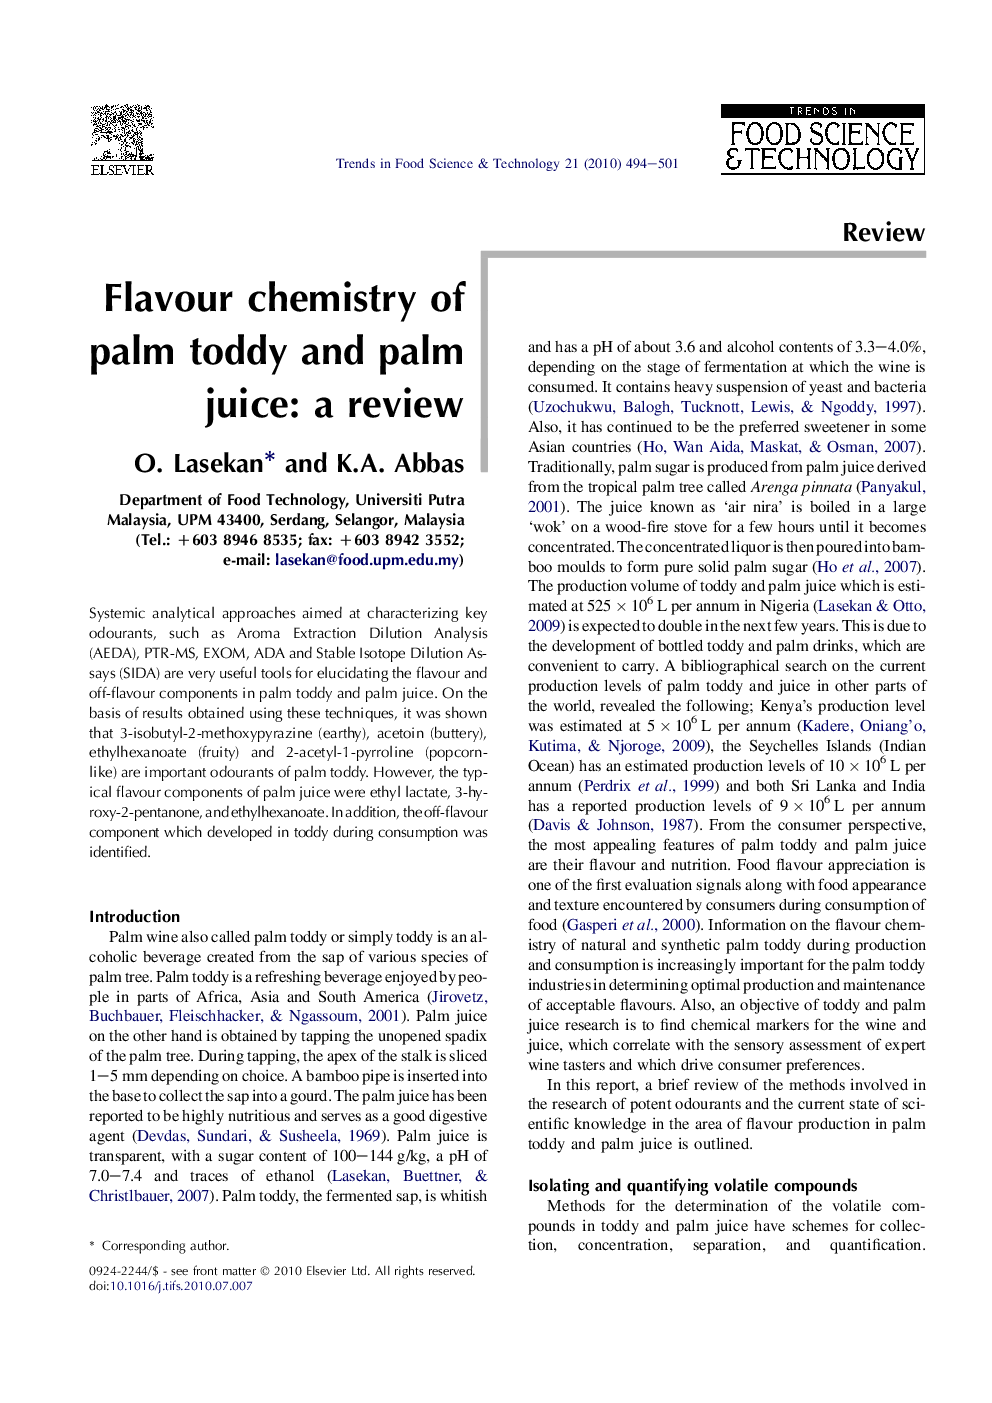 Flavour chemistry of palm toddy and palm juice: a review